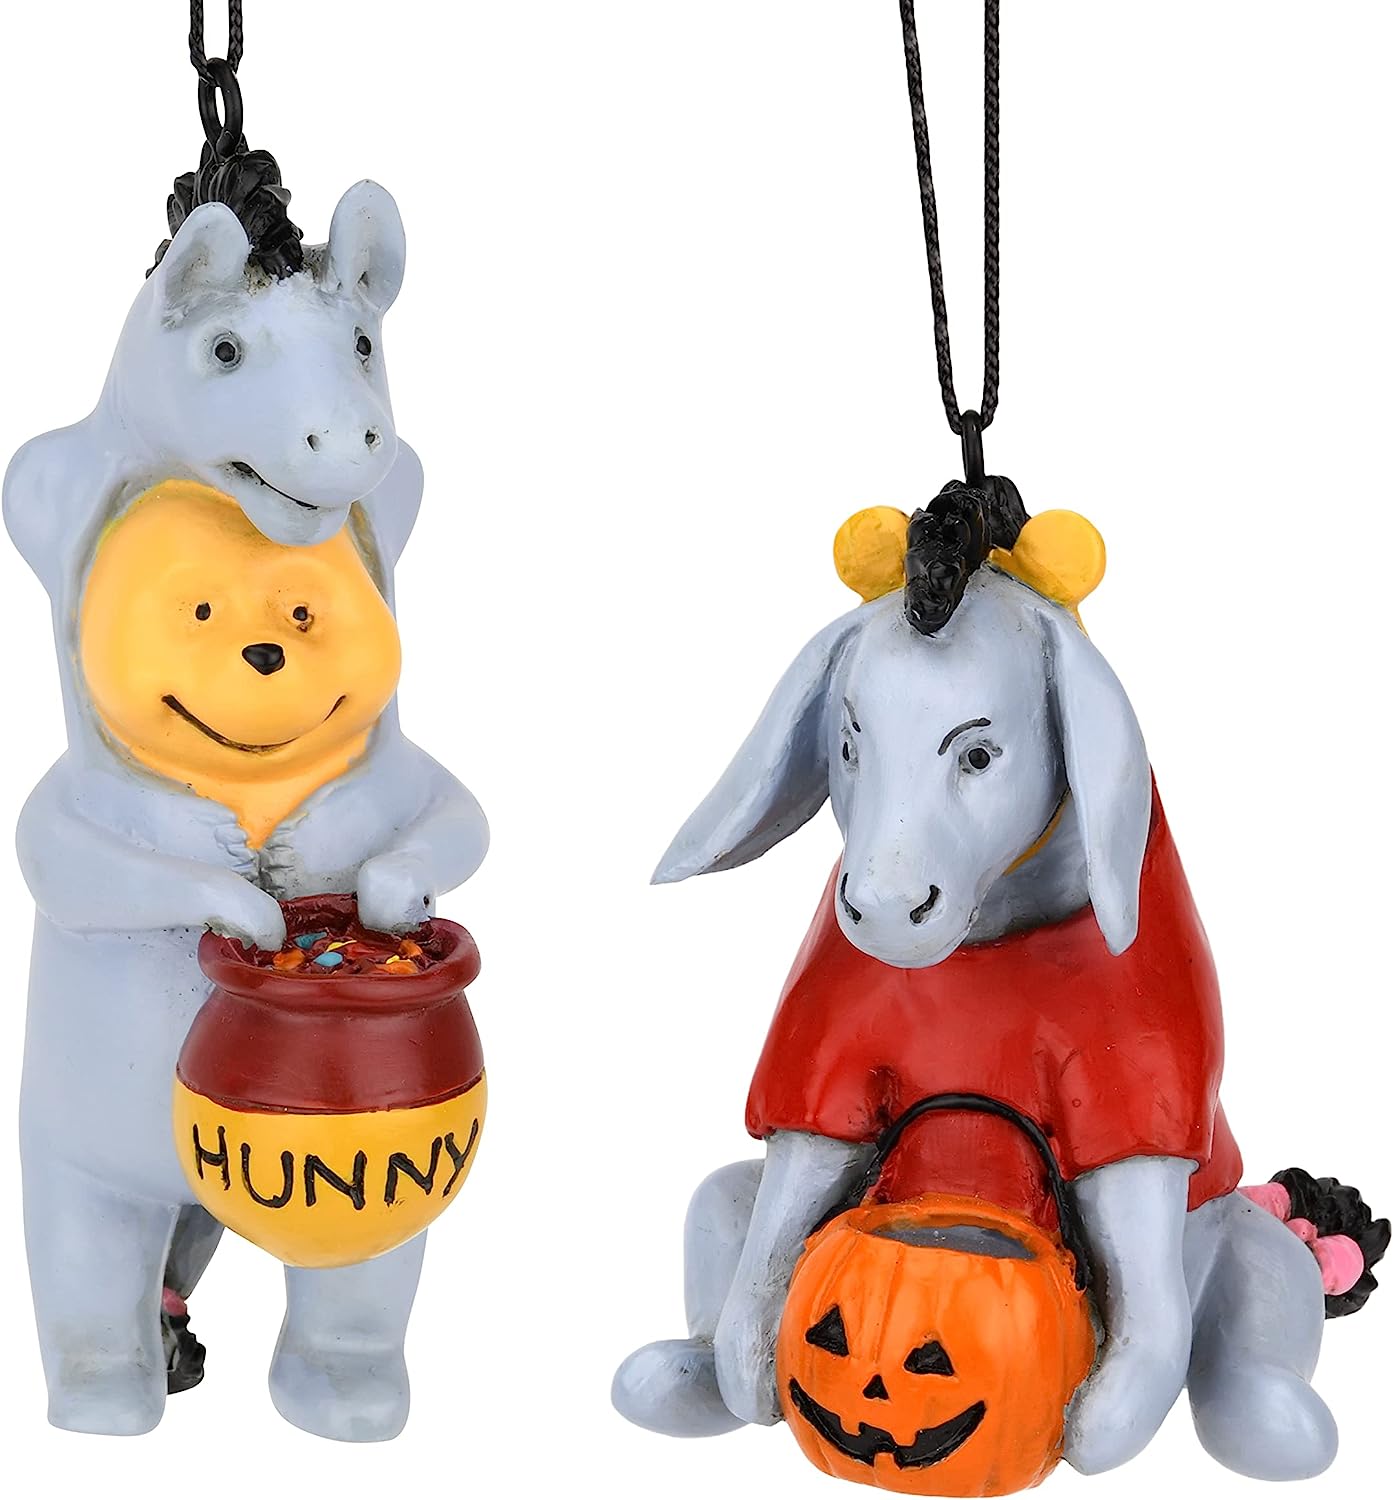 Tree Buddees Winnie The Pooh and Eeyore Dressed up as Each Other for Trick or Treating Cute Halloween Ornaments